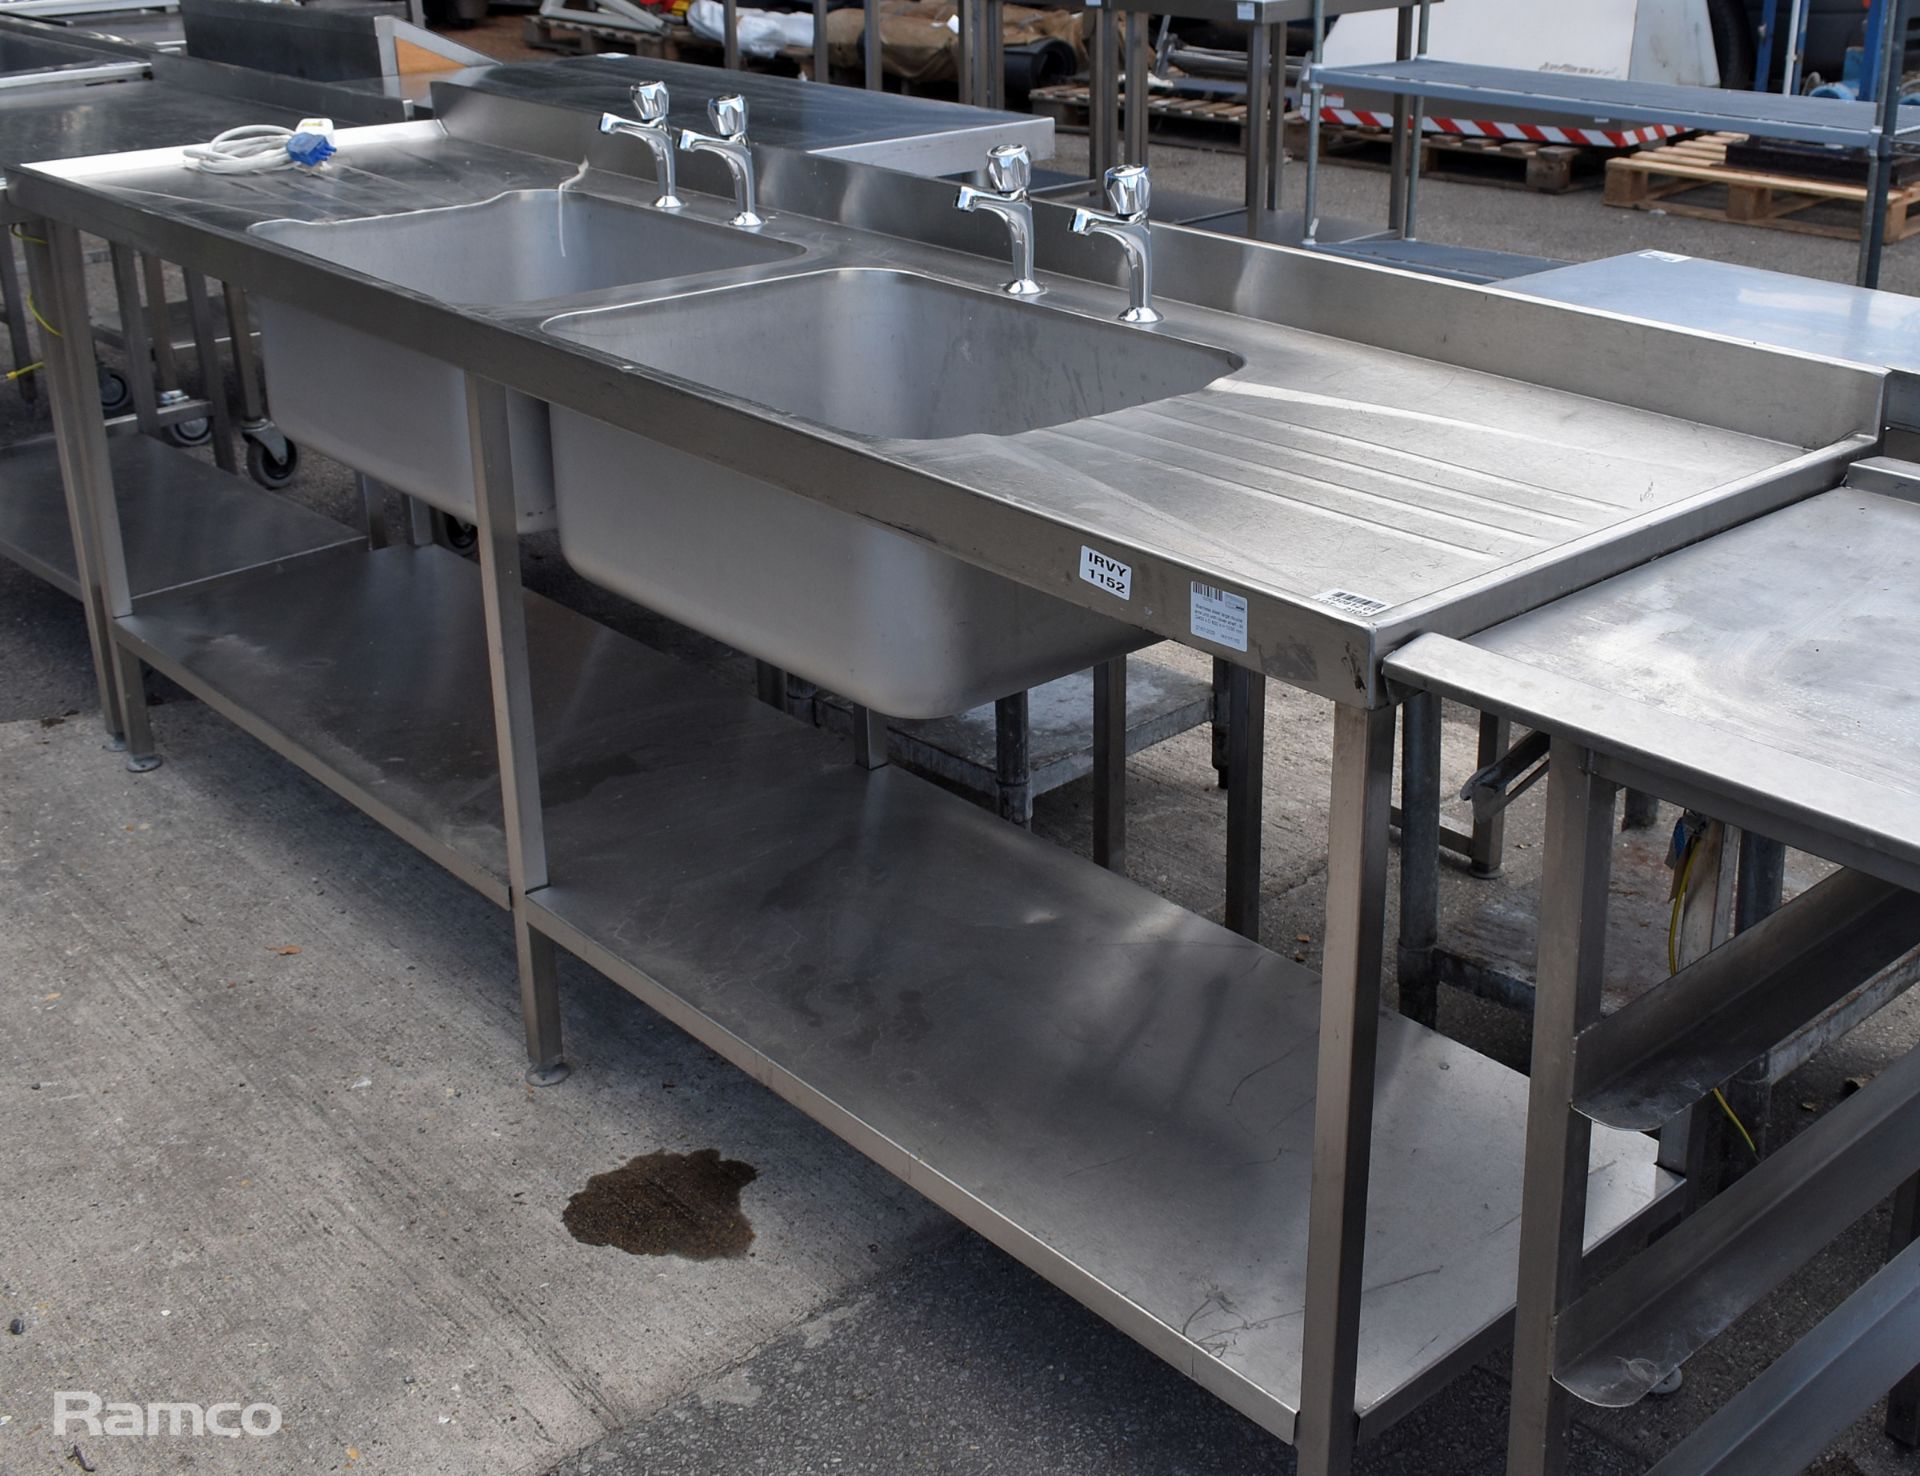 Stainless steel large double sink unit with lower shelf - W 2400 x D 650 x H 1030mm - Image 3 of 6